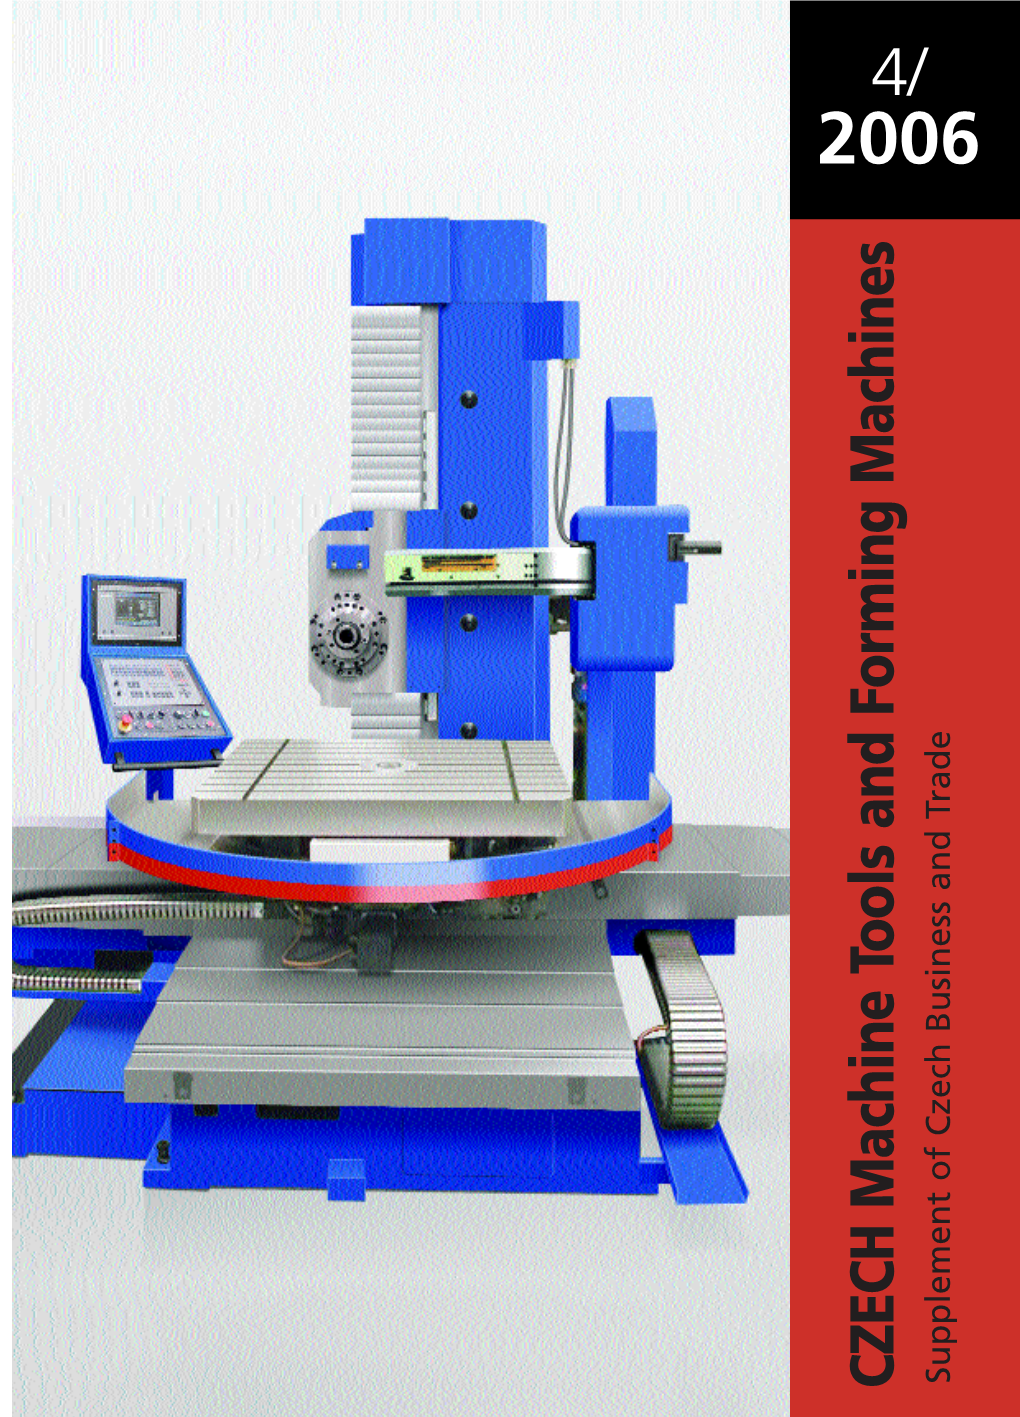 CZECH Machine Tools and Forming Machines Supplement of Czech